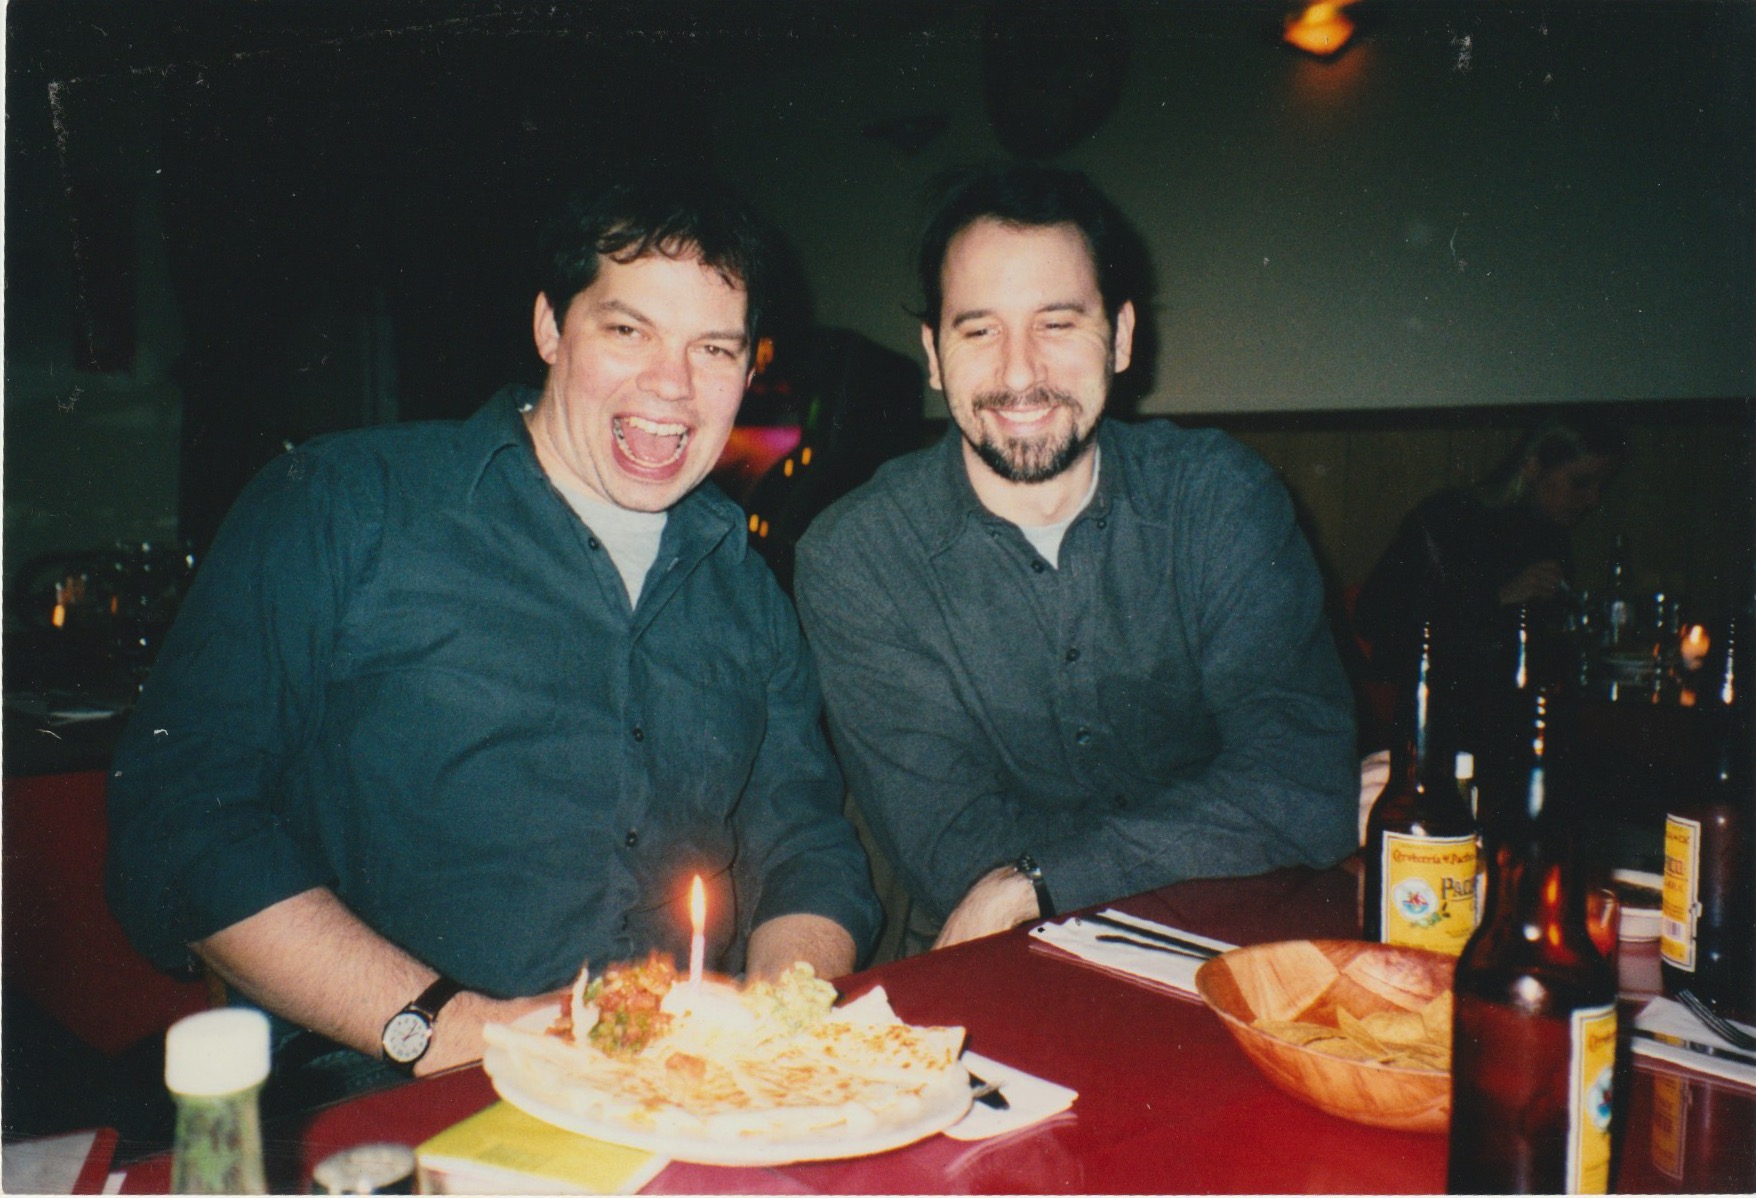 David Rhoden and Alan Dorsey posing with a candle-lit burrito at La Ceiba, March 2, 2003.